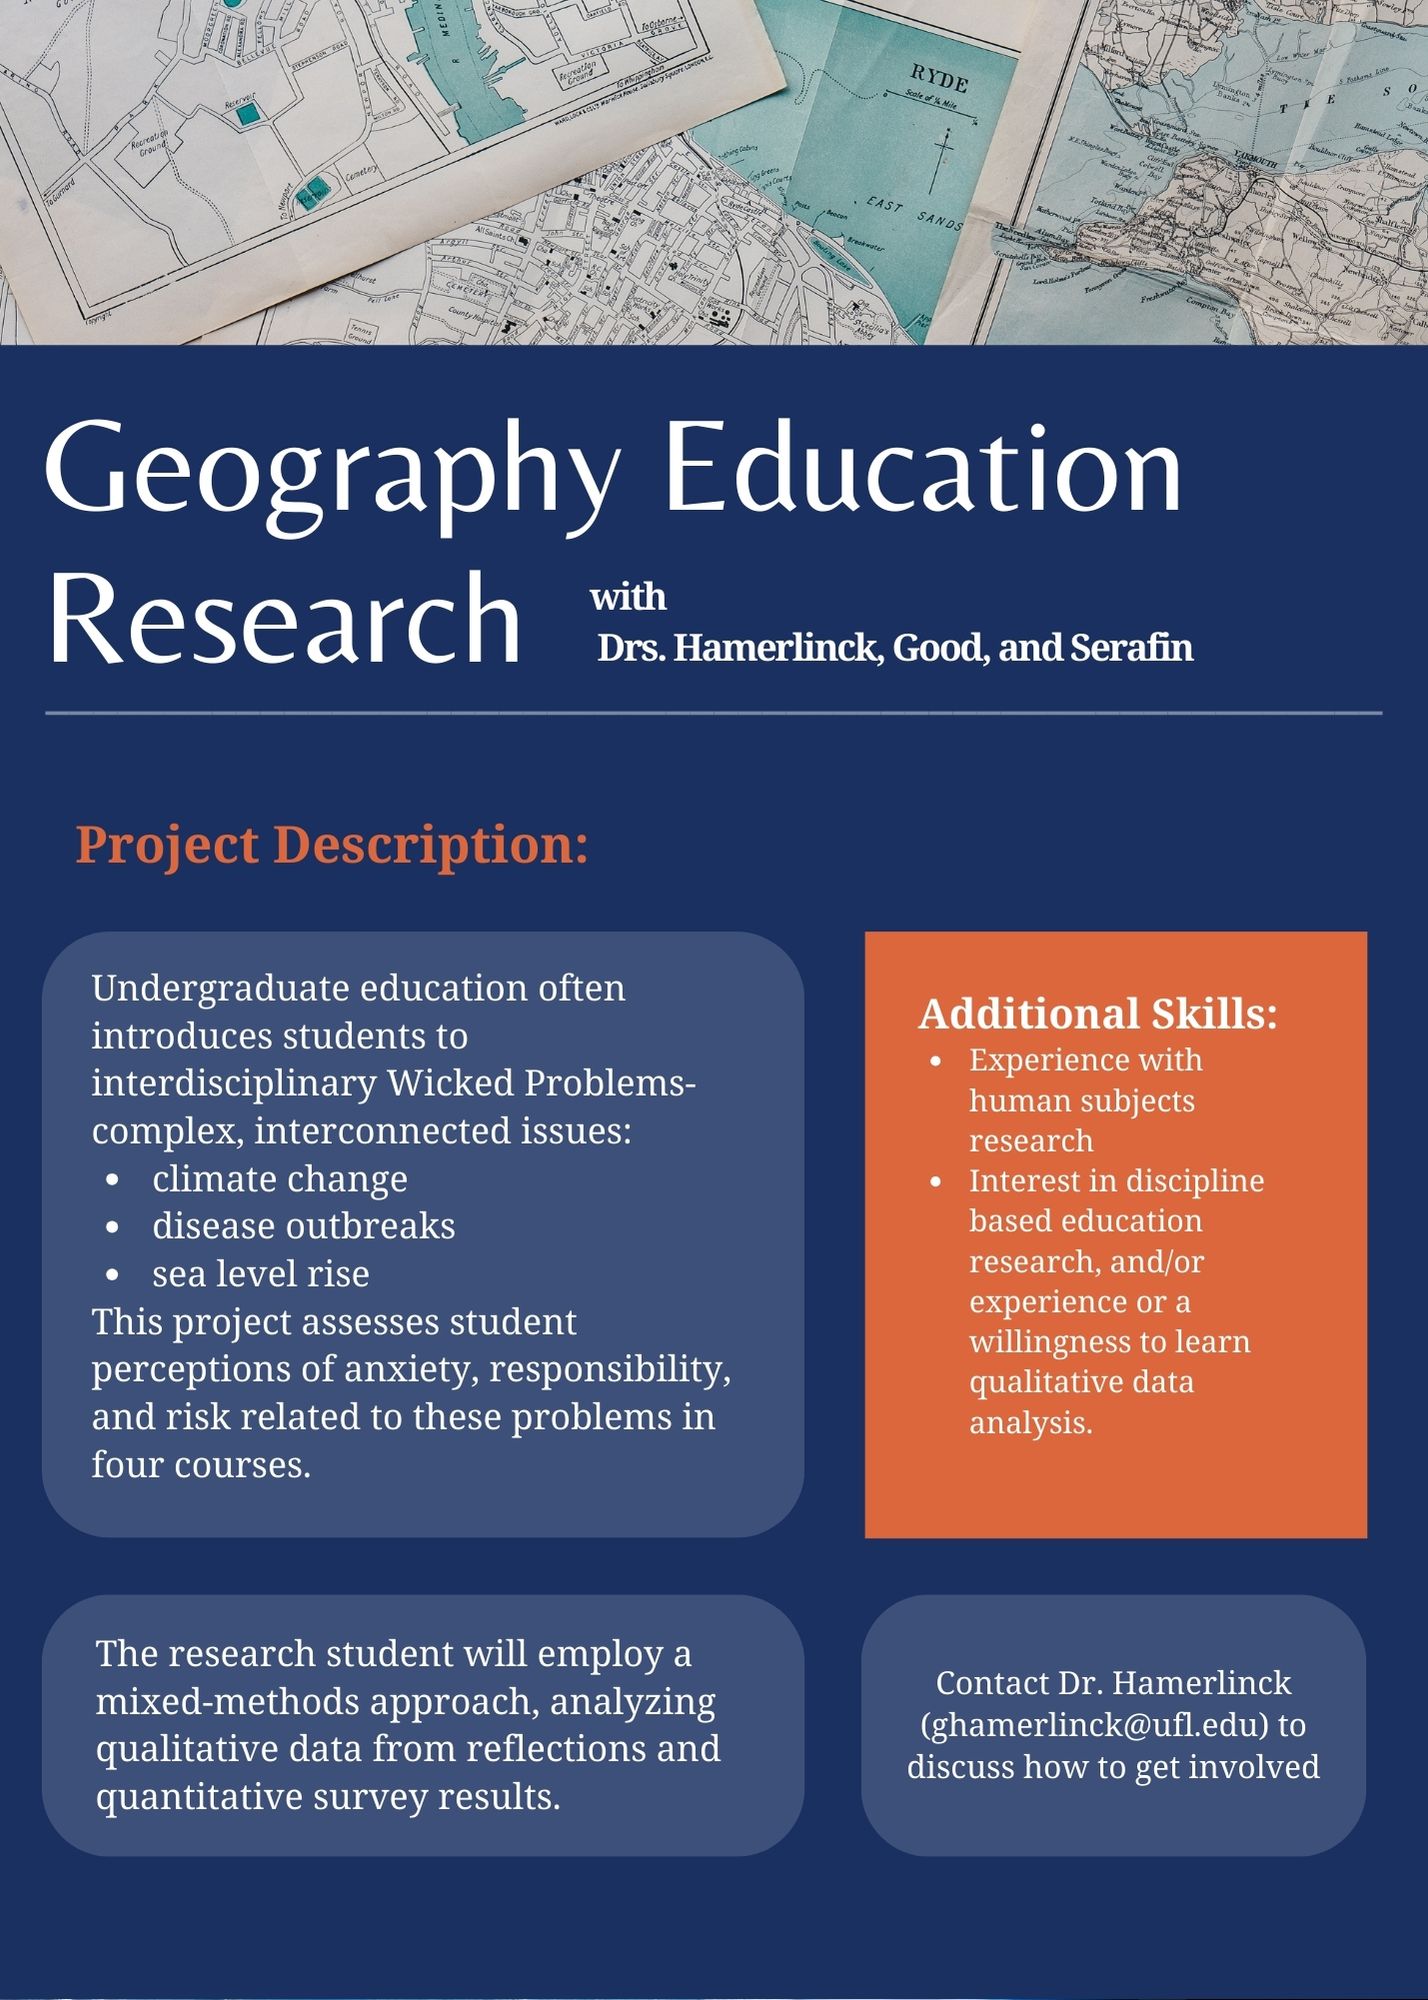 Geography education research with Drs. Hamerlinck, Good, and Serafin